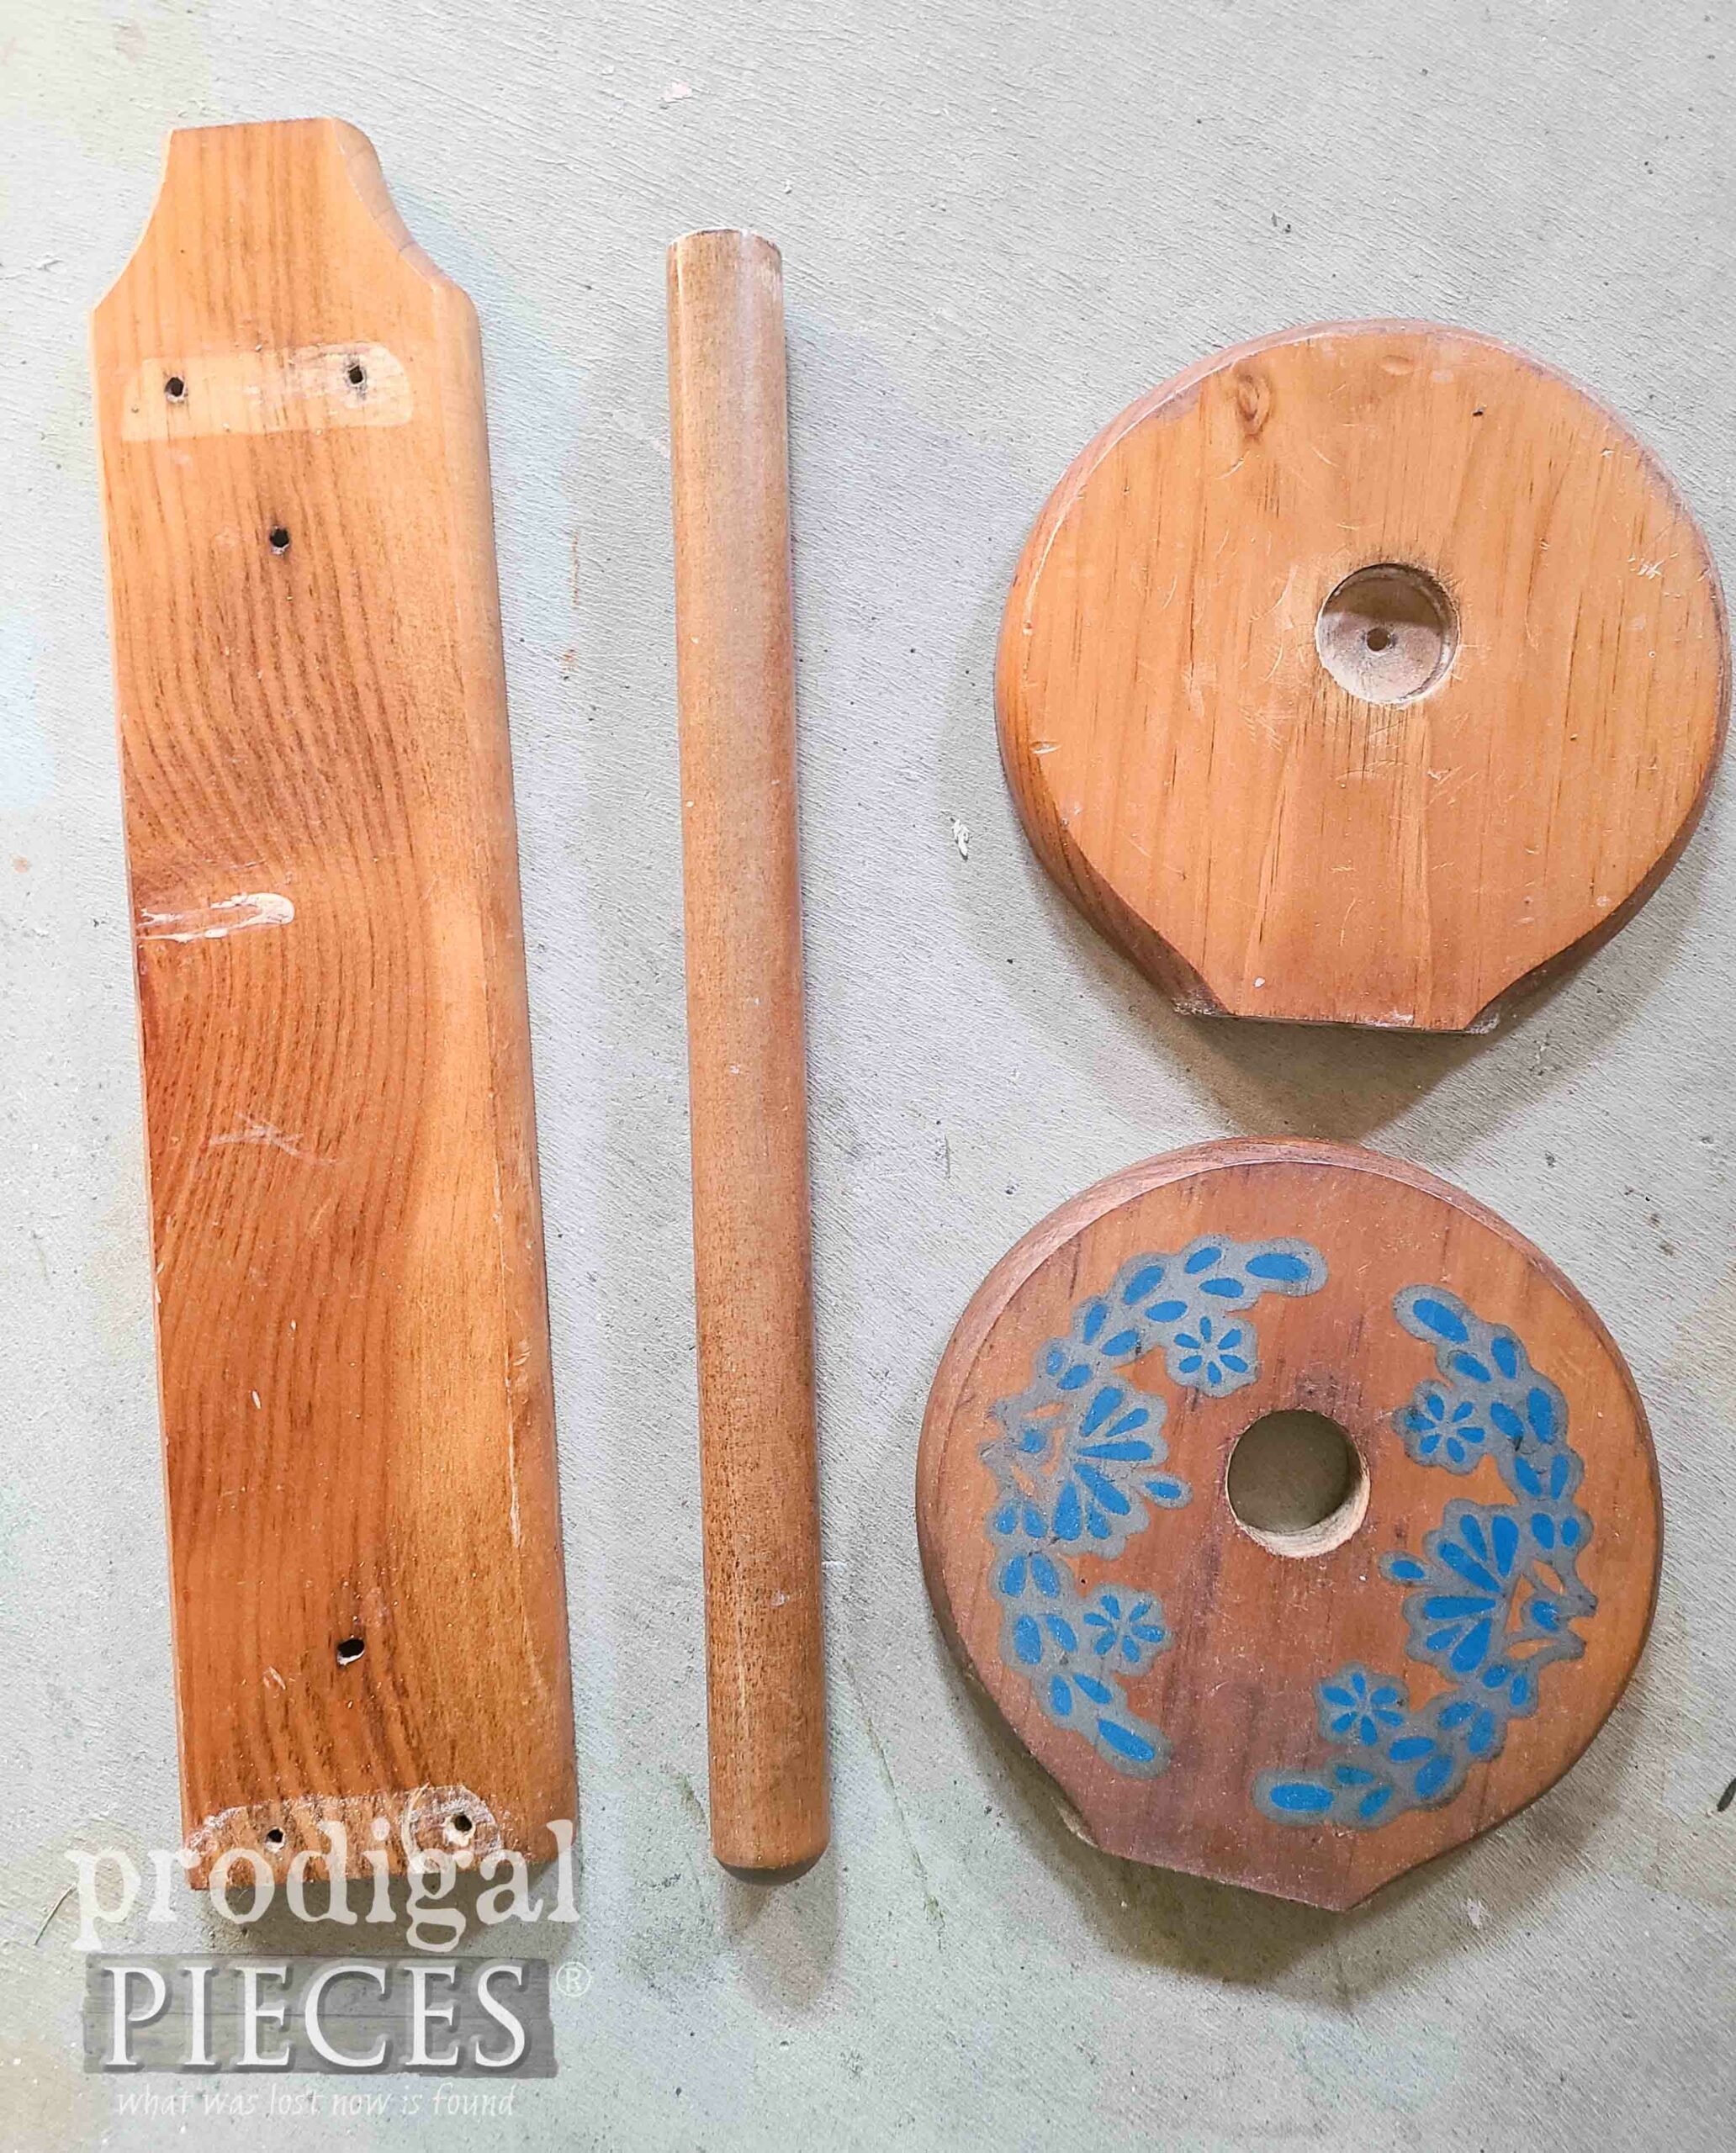 Disassembled Paper Towel Holder for Upcycle | prodigalpieces.com #prodigalpieces